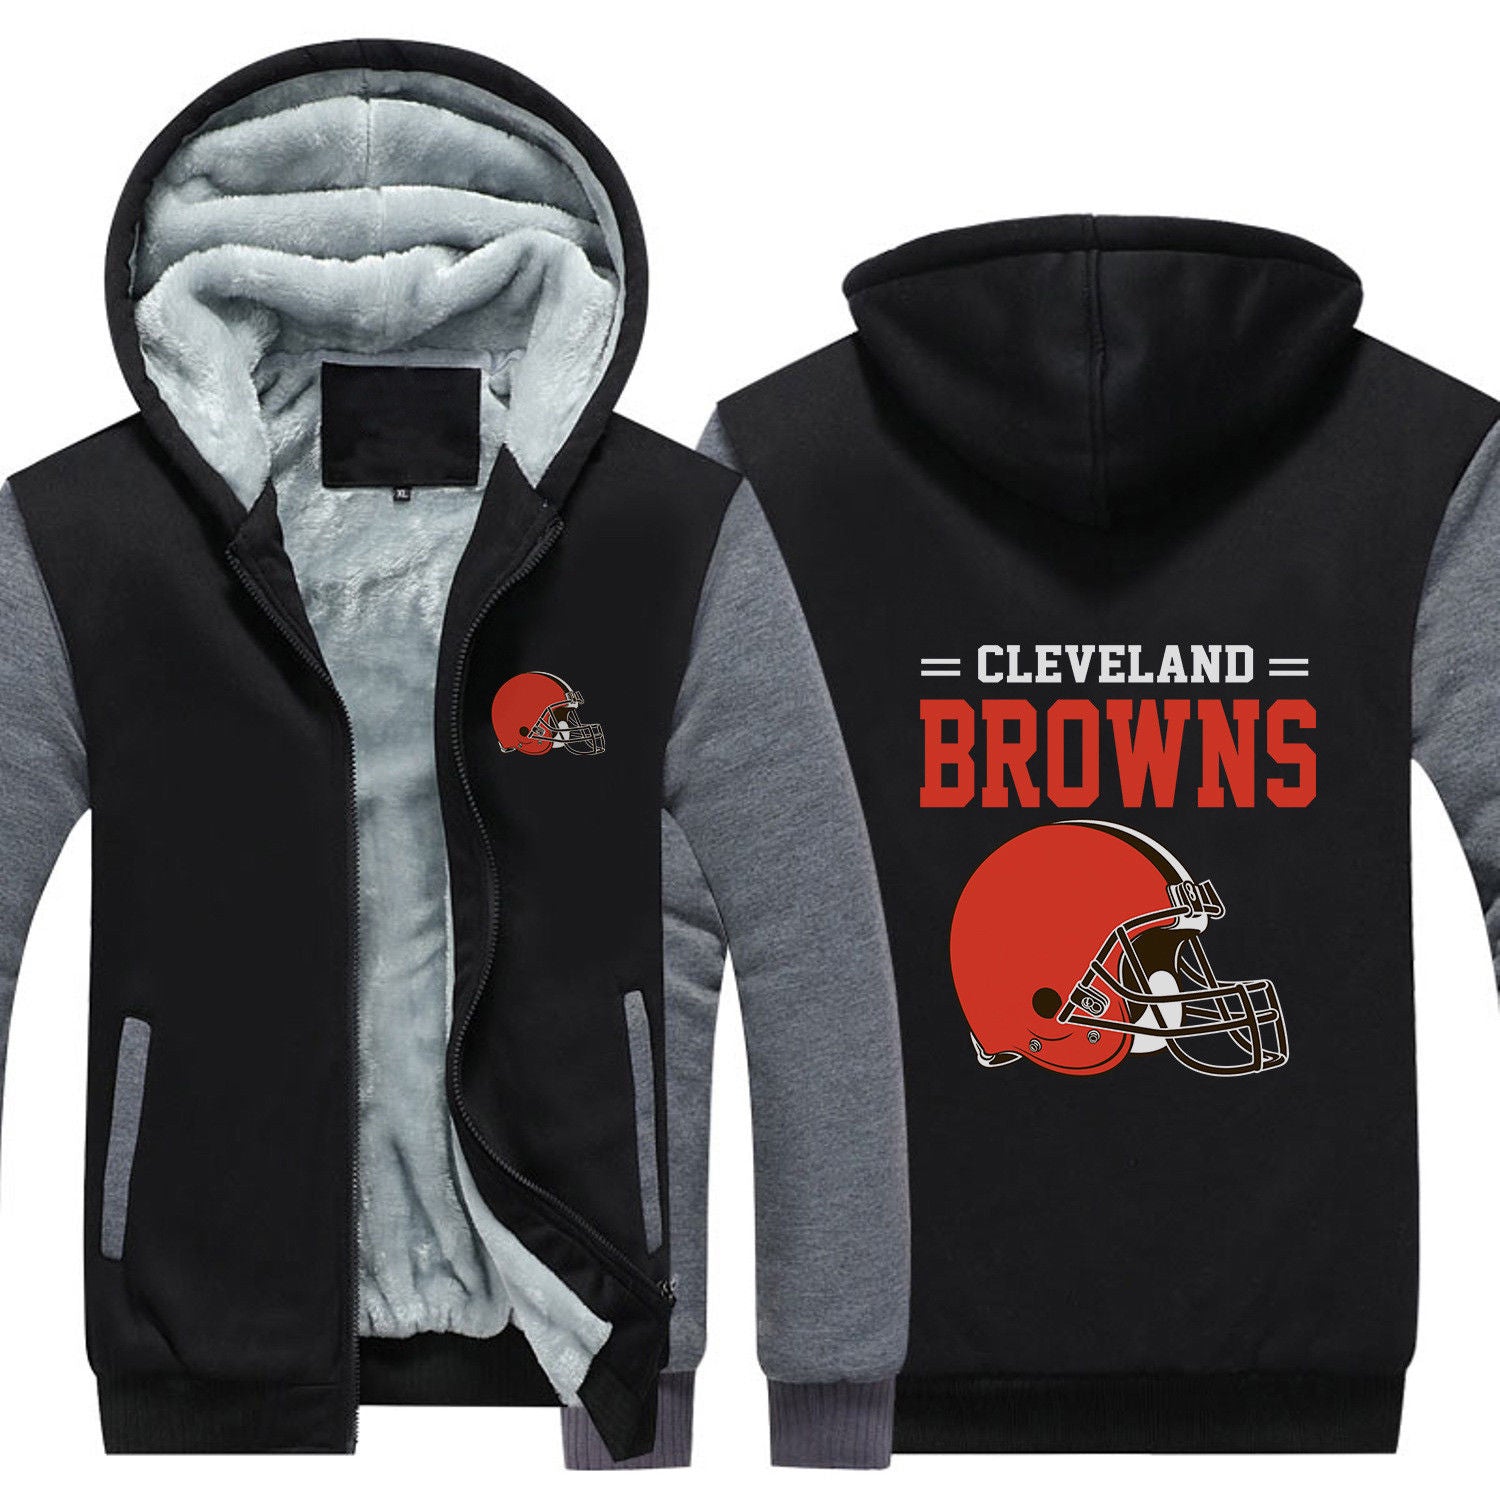 Cleveland Browns Hoodie Jacket X-Large